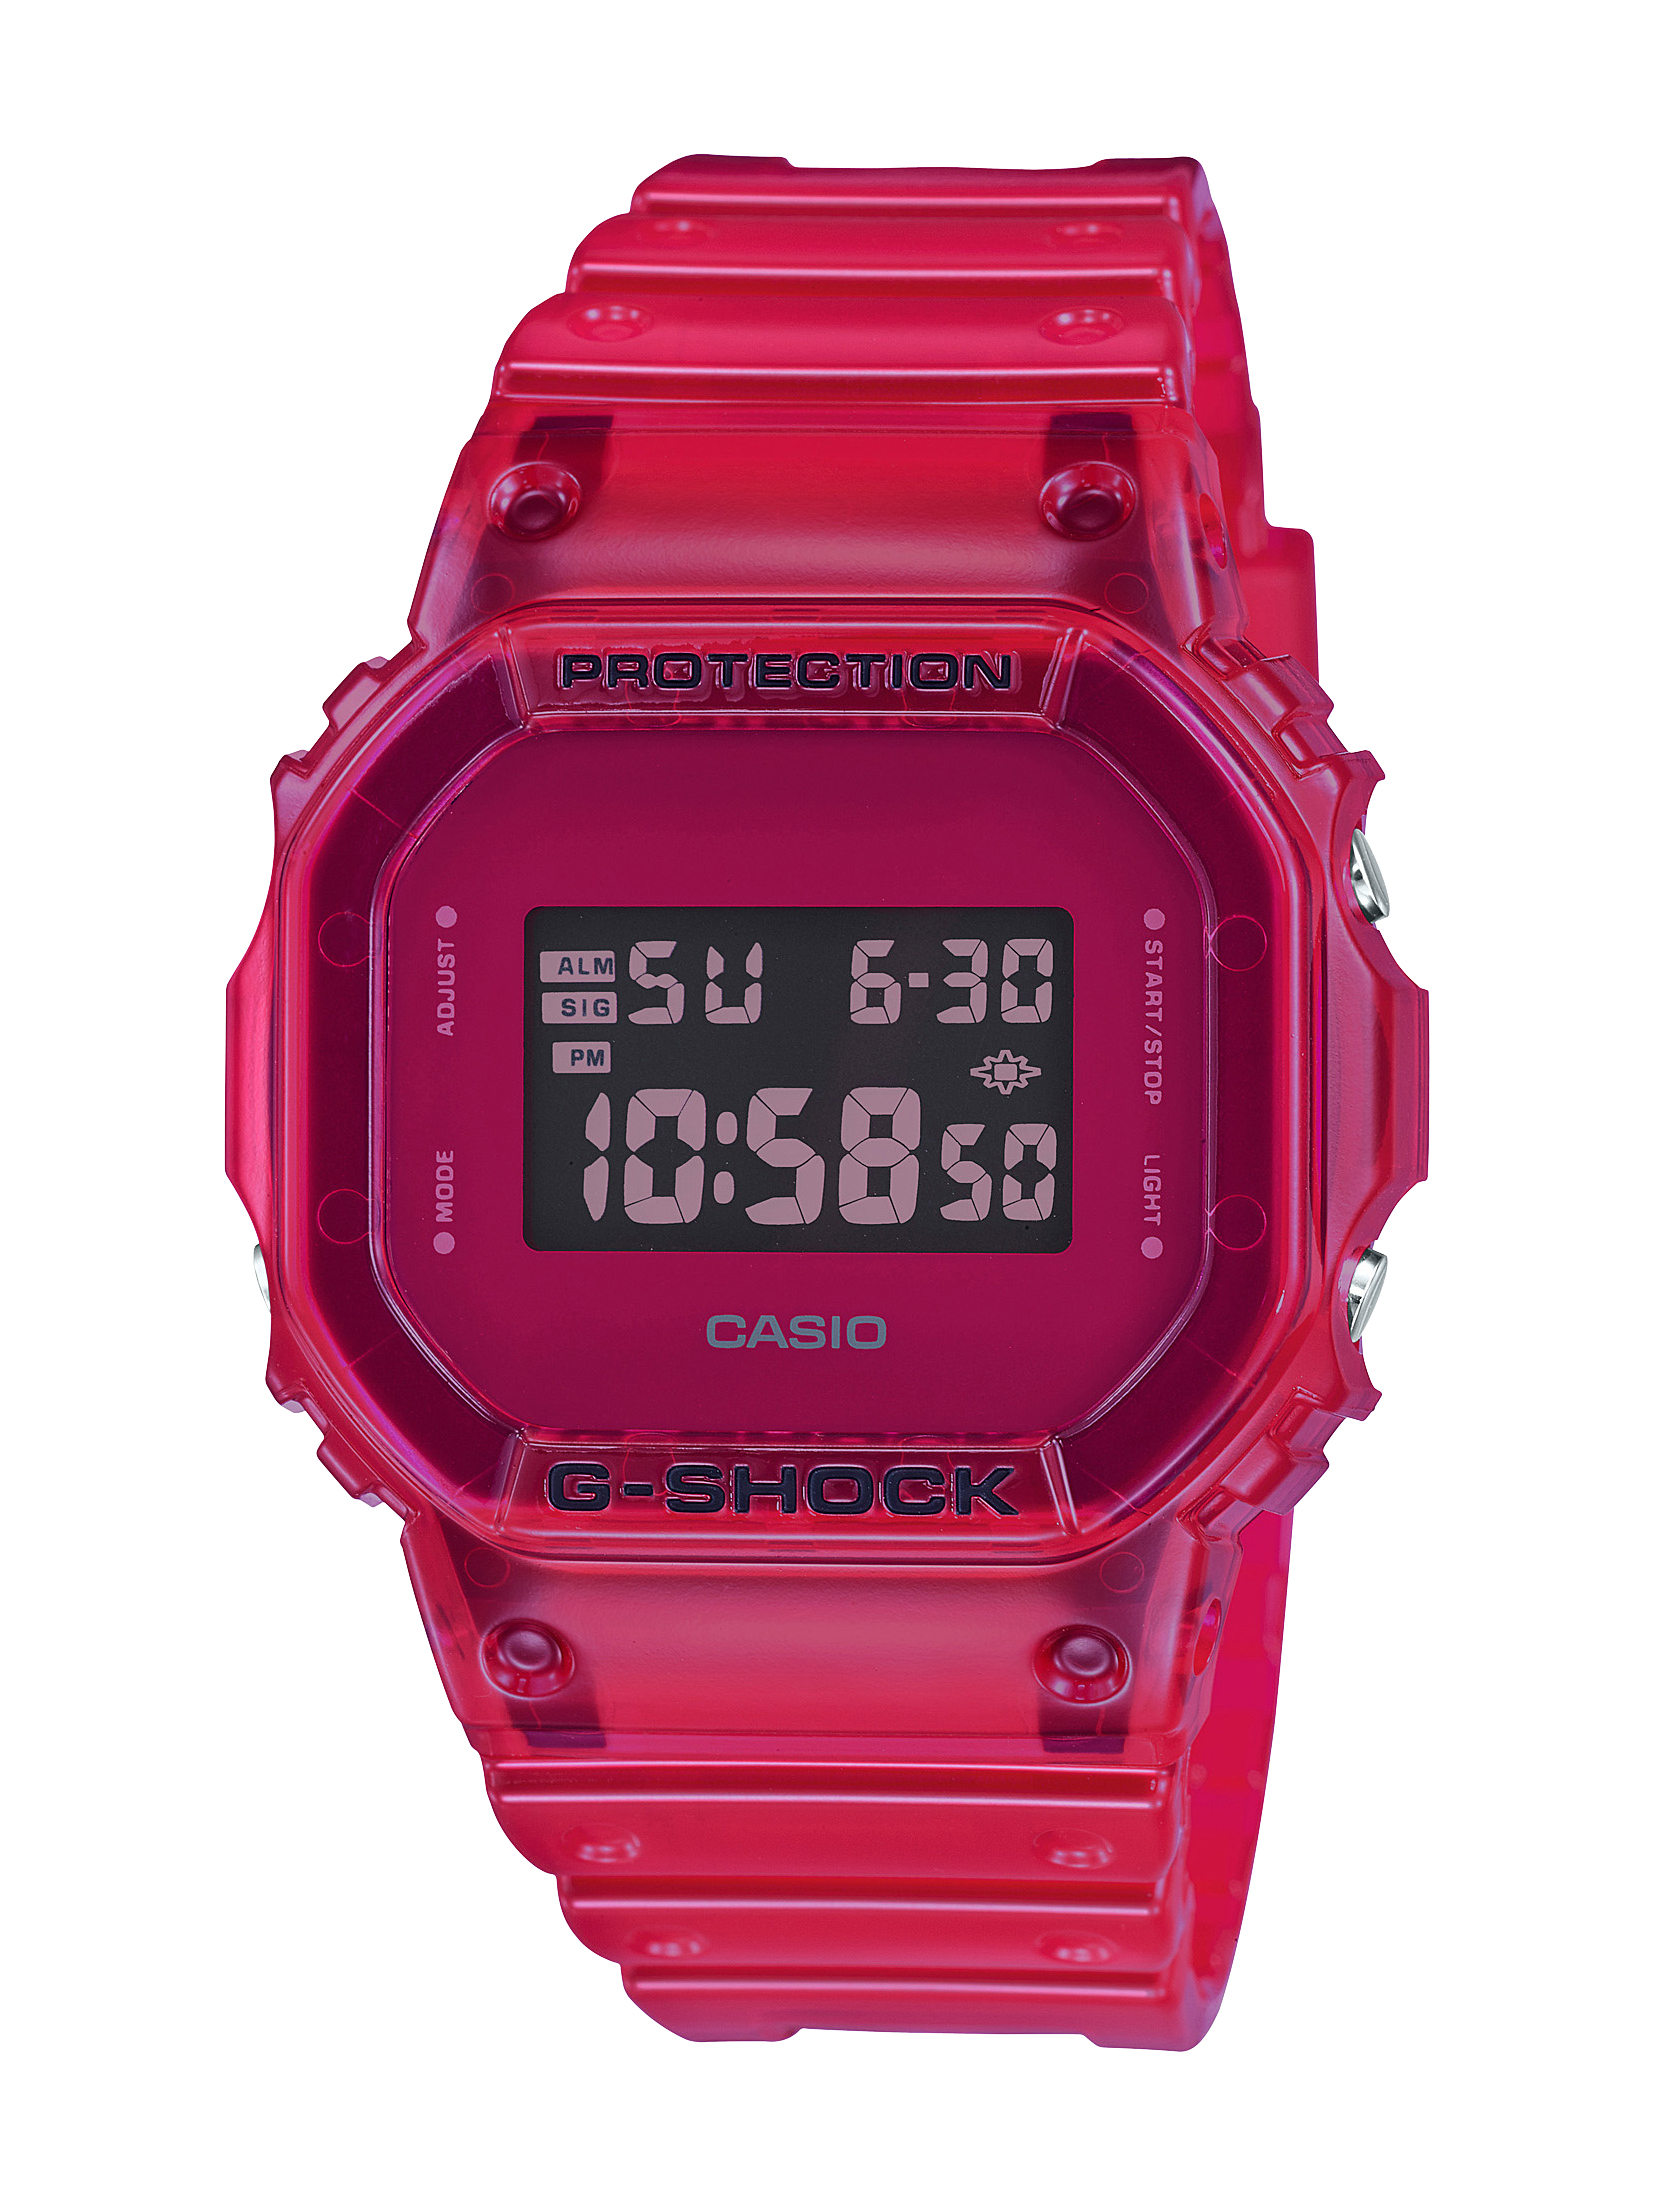 Casio G-Shock DW-5600RB-3 44mm in Resin - US